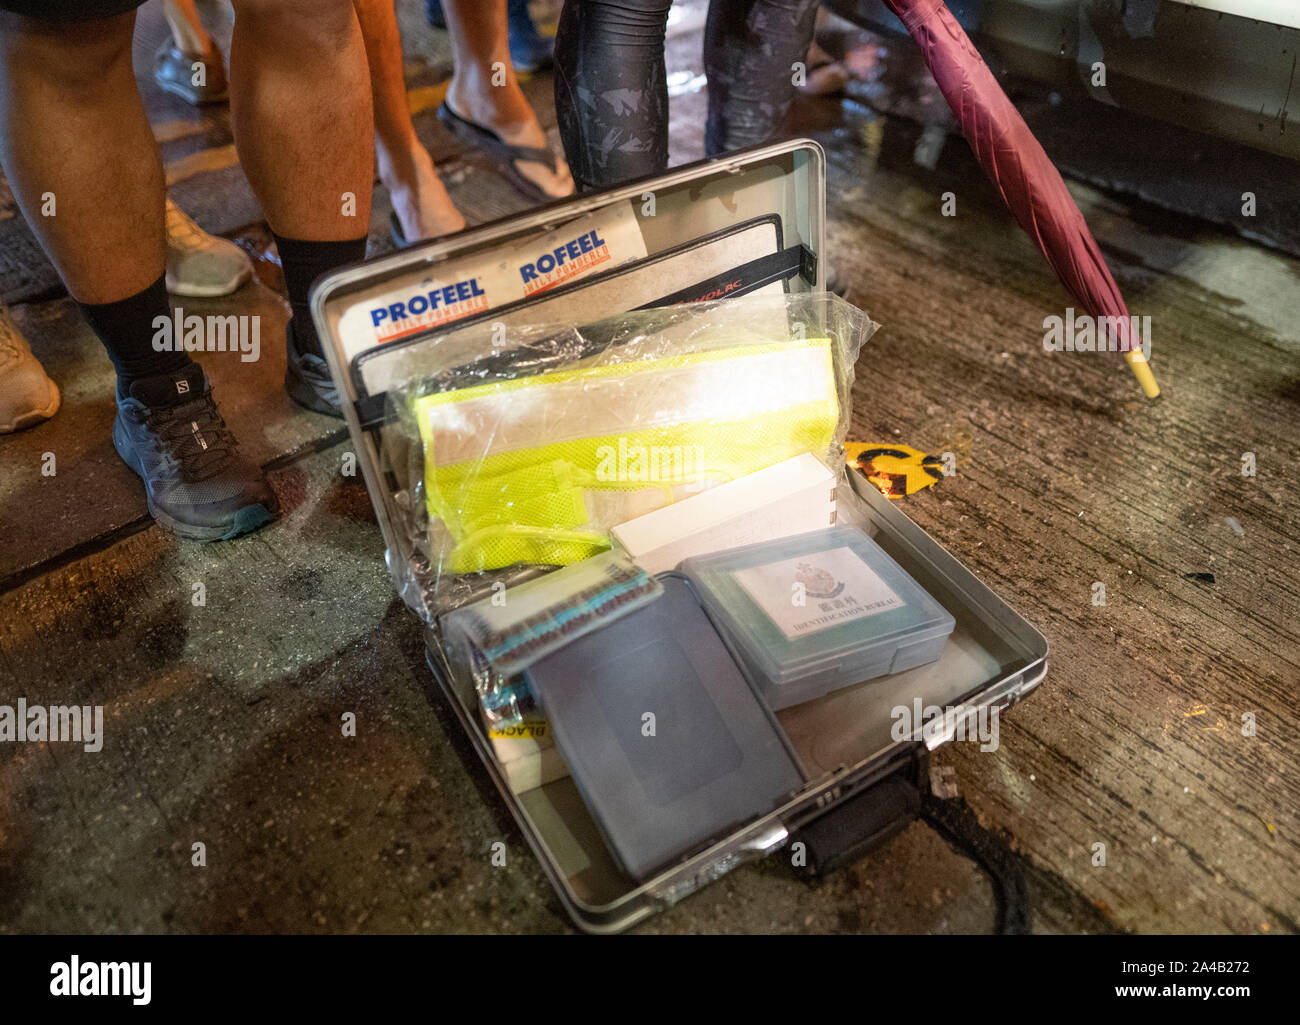 Hong Kong, China. 13th October 2019. Riot police on Nathan Road in Mongkok district in Kowloon on Sunday evening. This incident was one of several throughout Hong Kong on Sunday which saw acts of vandalism carried out by a minority in the pro-democracy movement. Police briefcase taken from vandalised unmarked police car . Iain Masterton/Alamy Live News. Stock Photo